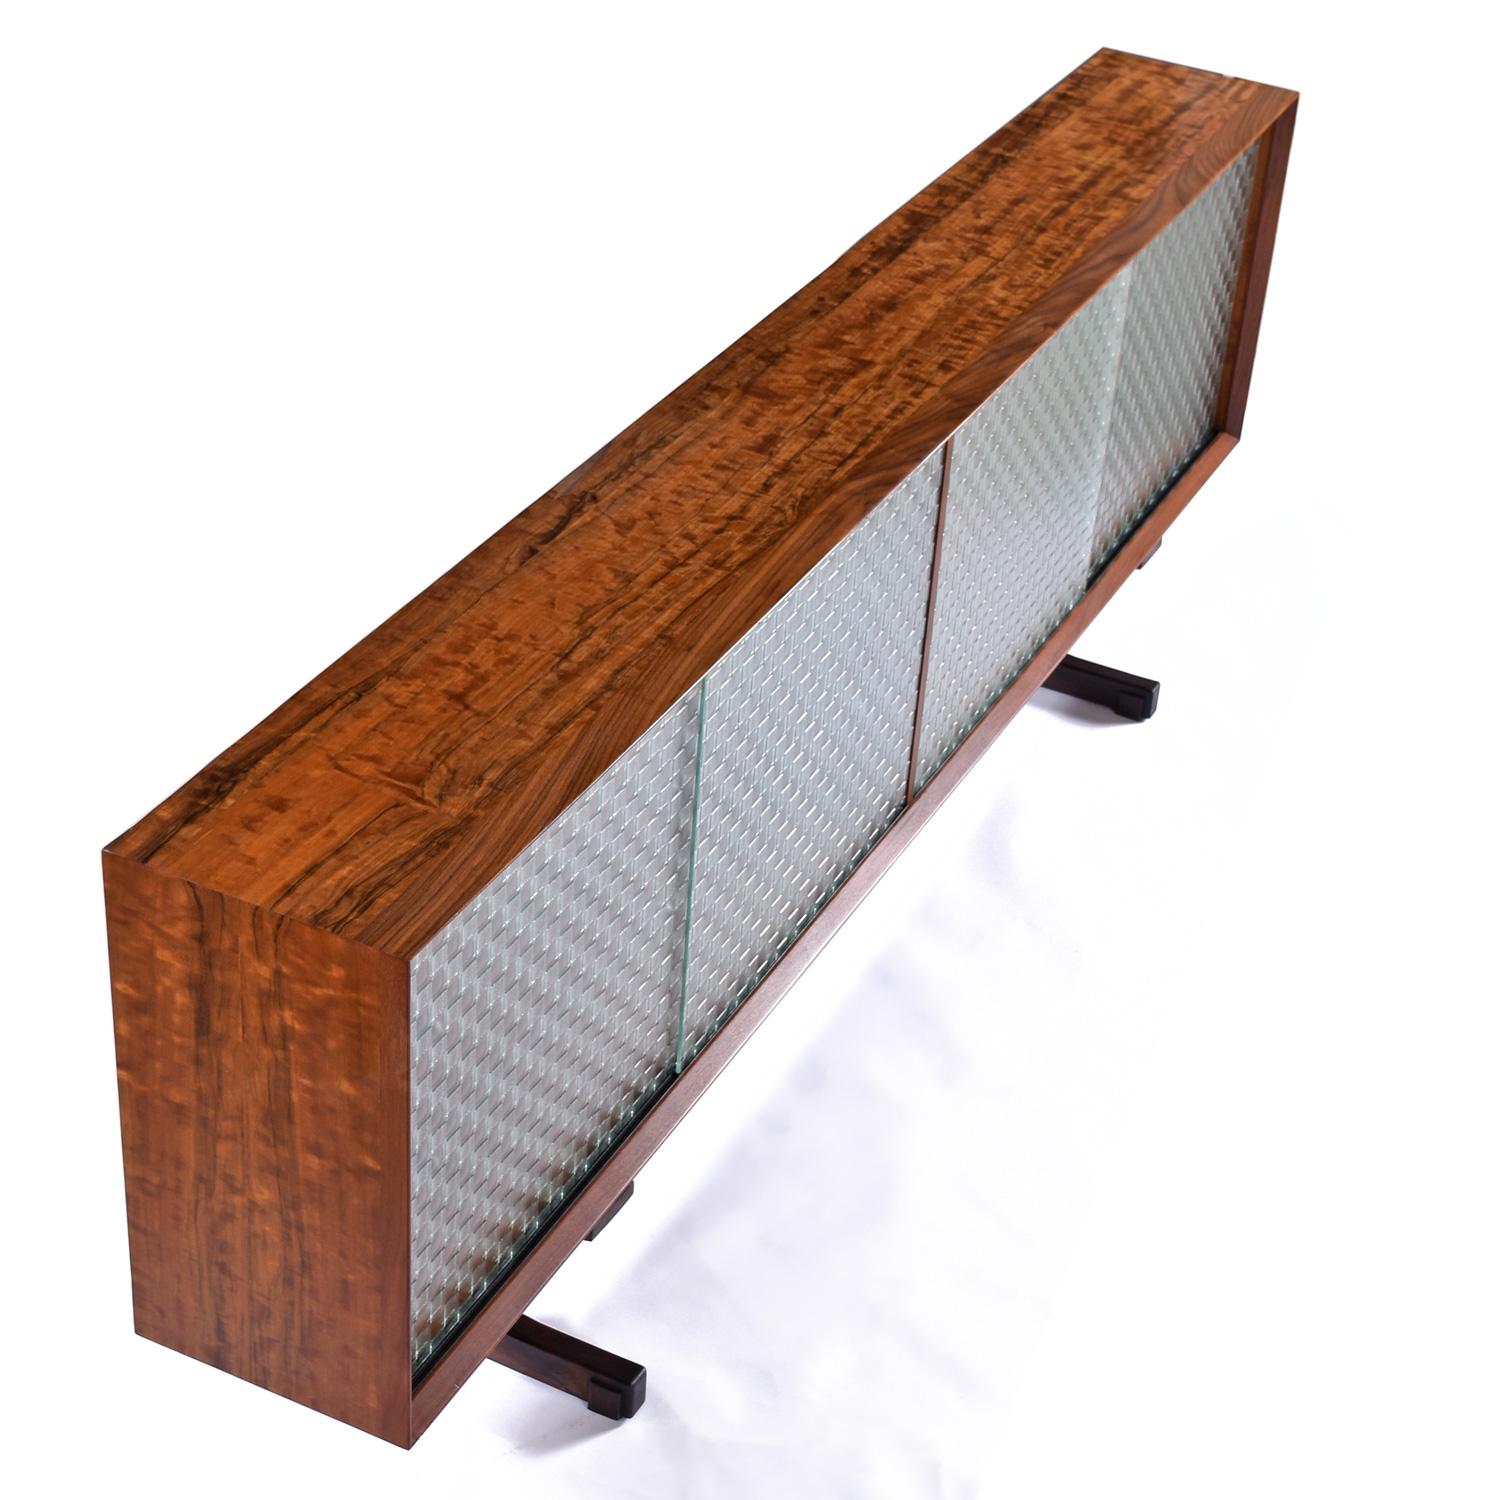 1950's Custom Made Mid-Century Modern Glass Door Mahogany Rosewood Credenza For Sale 1